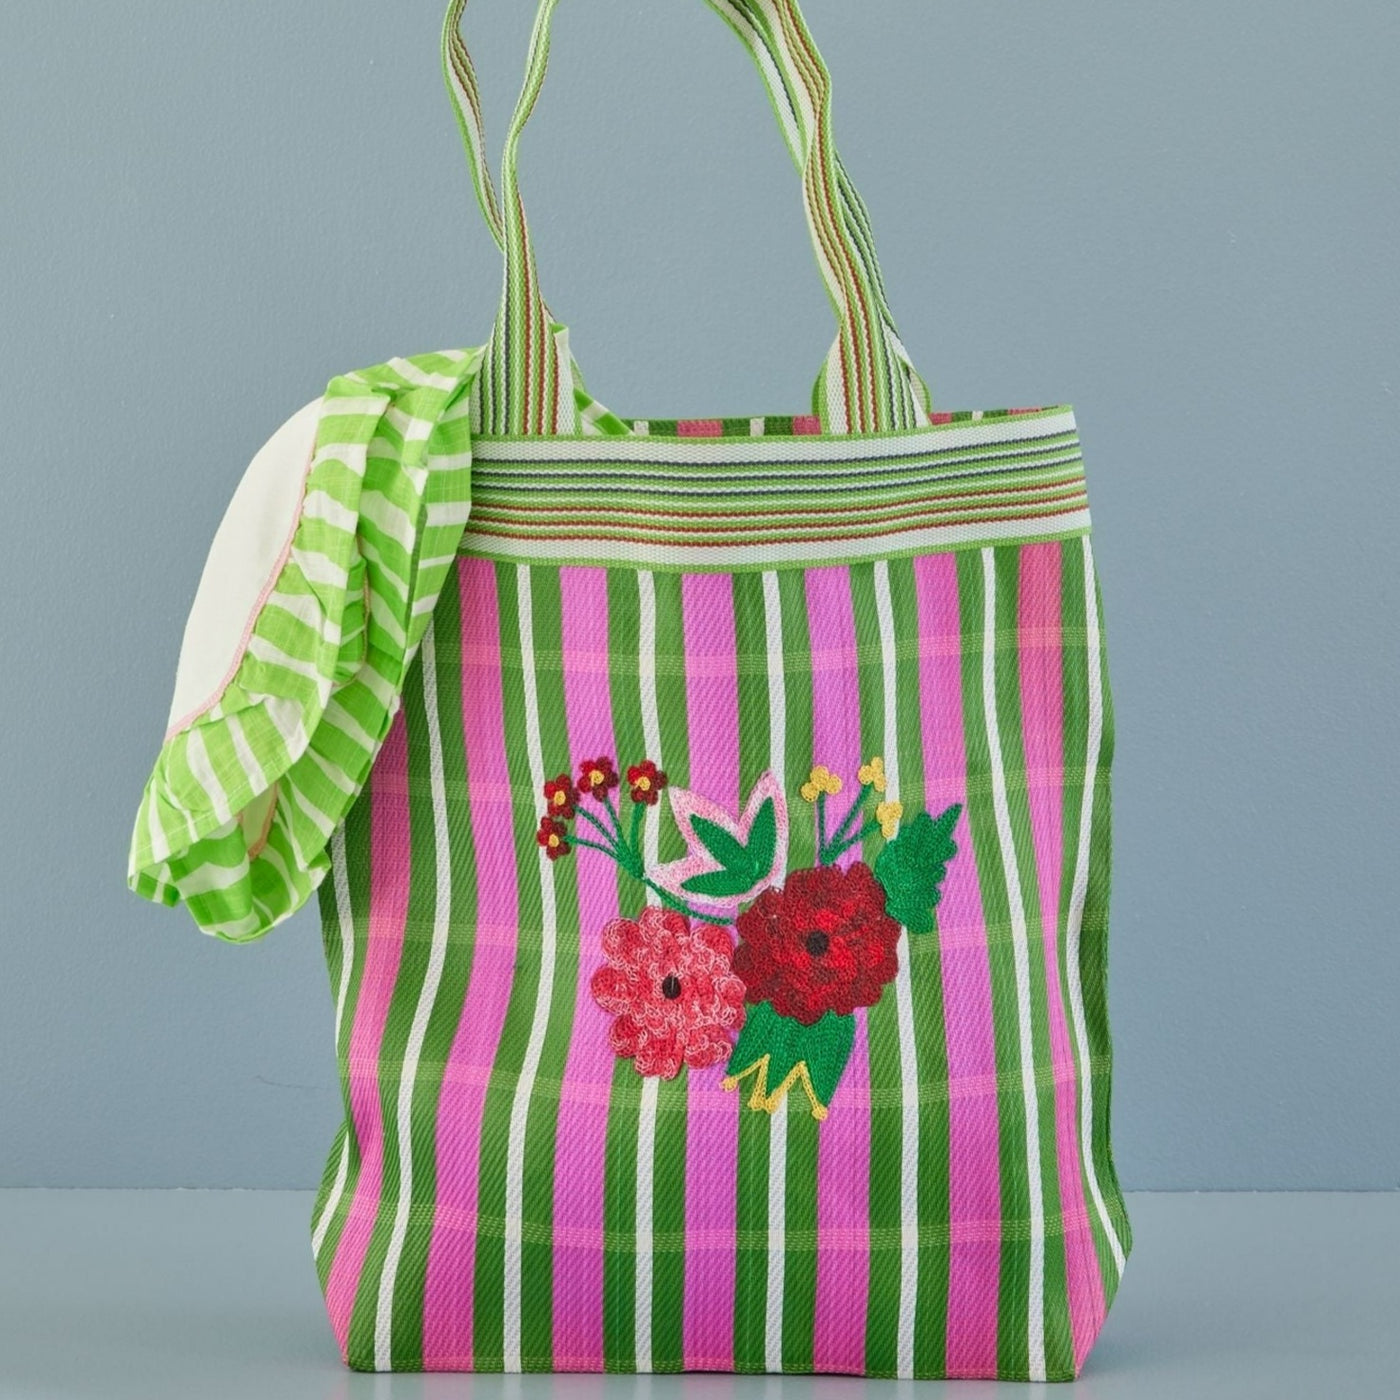 Rice - Recycled Plastic Shopping Bag - Floral Stripe - Pink & Green